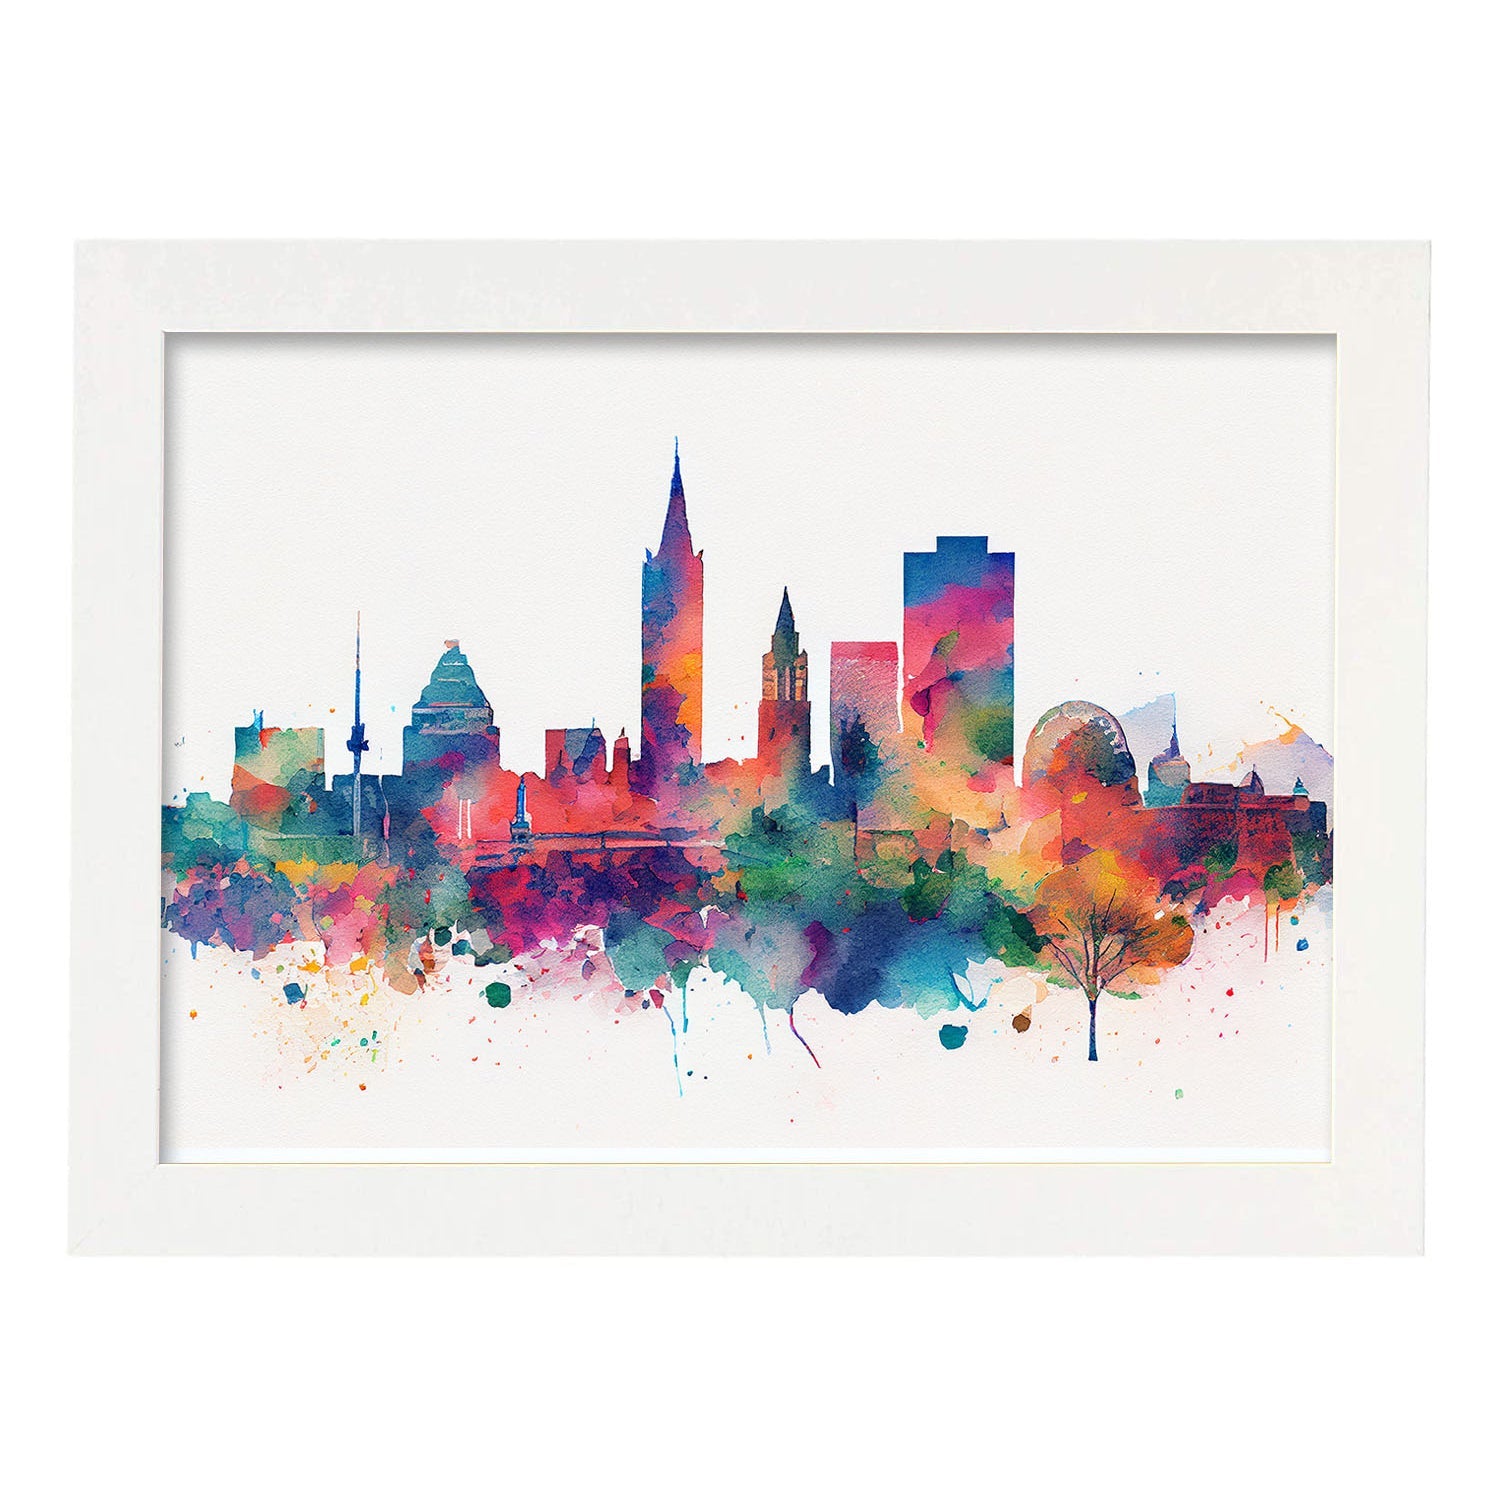 Nacnic watercolor of a skyline of the city of Birmingham. Aesthetic Wall Art Prints for Bedroom or Living Room Design.-Artwork-Nacnic-A4-Marco Blanco-Nacnic Estudio SL